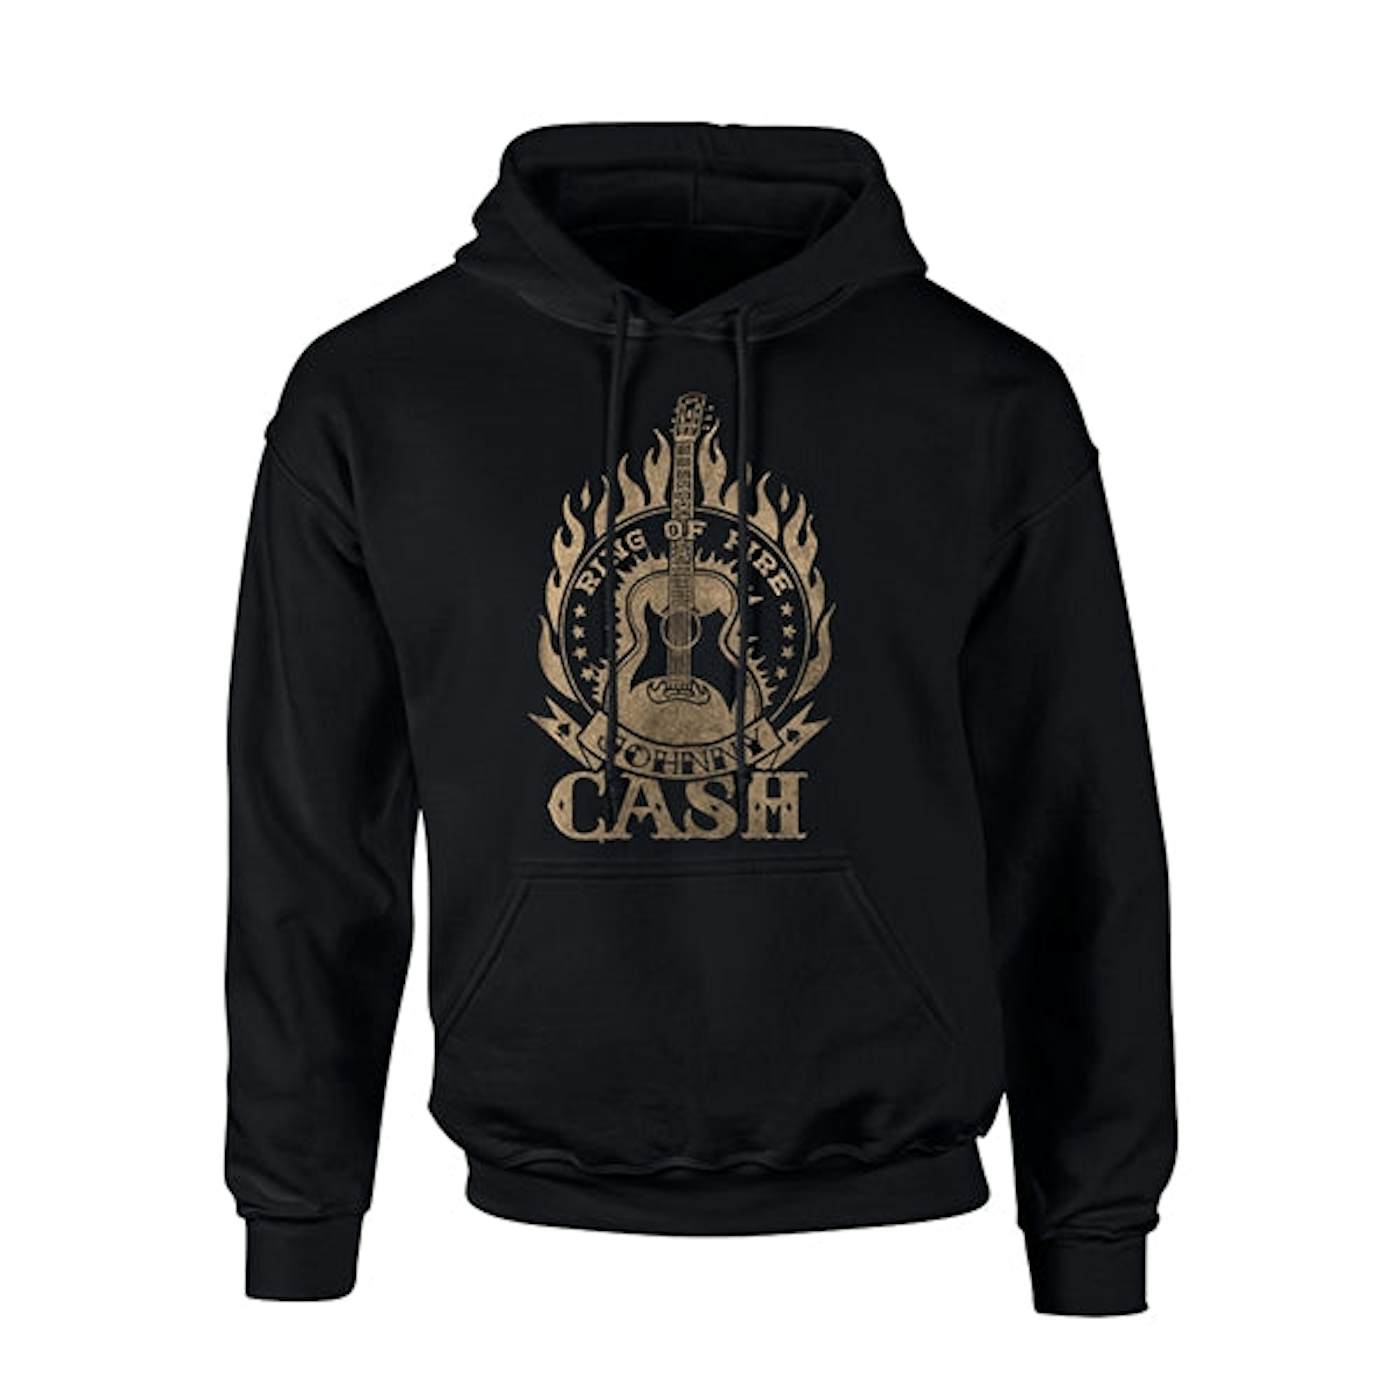 Johnny Cash Hoodie - Ring Of Fire